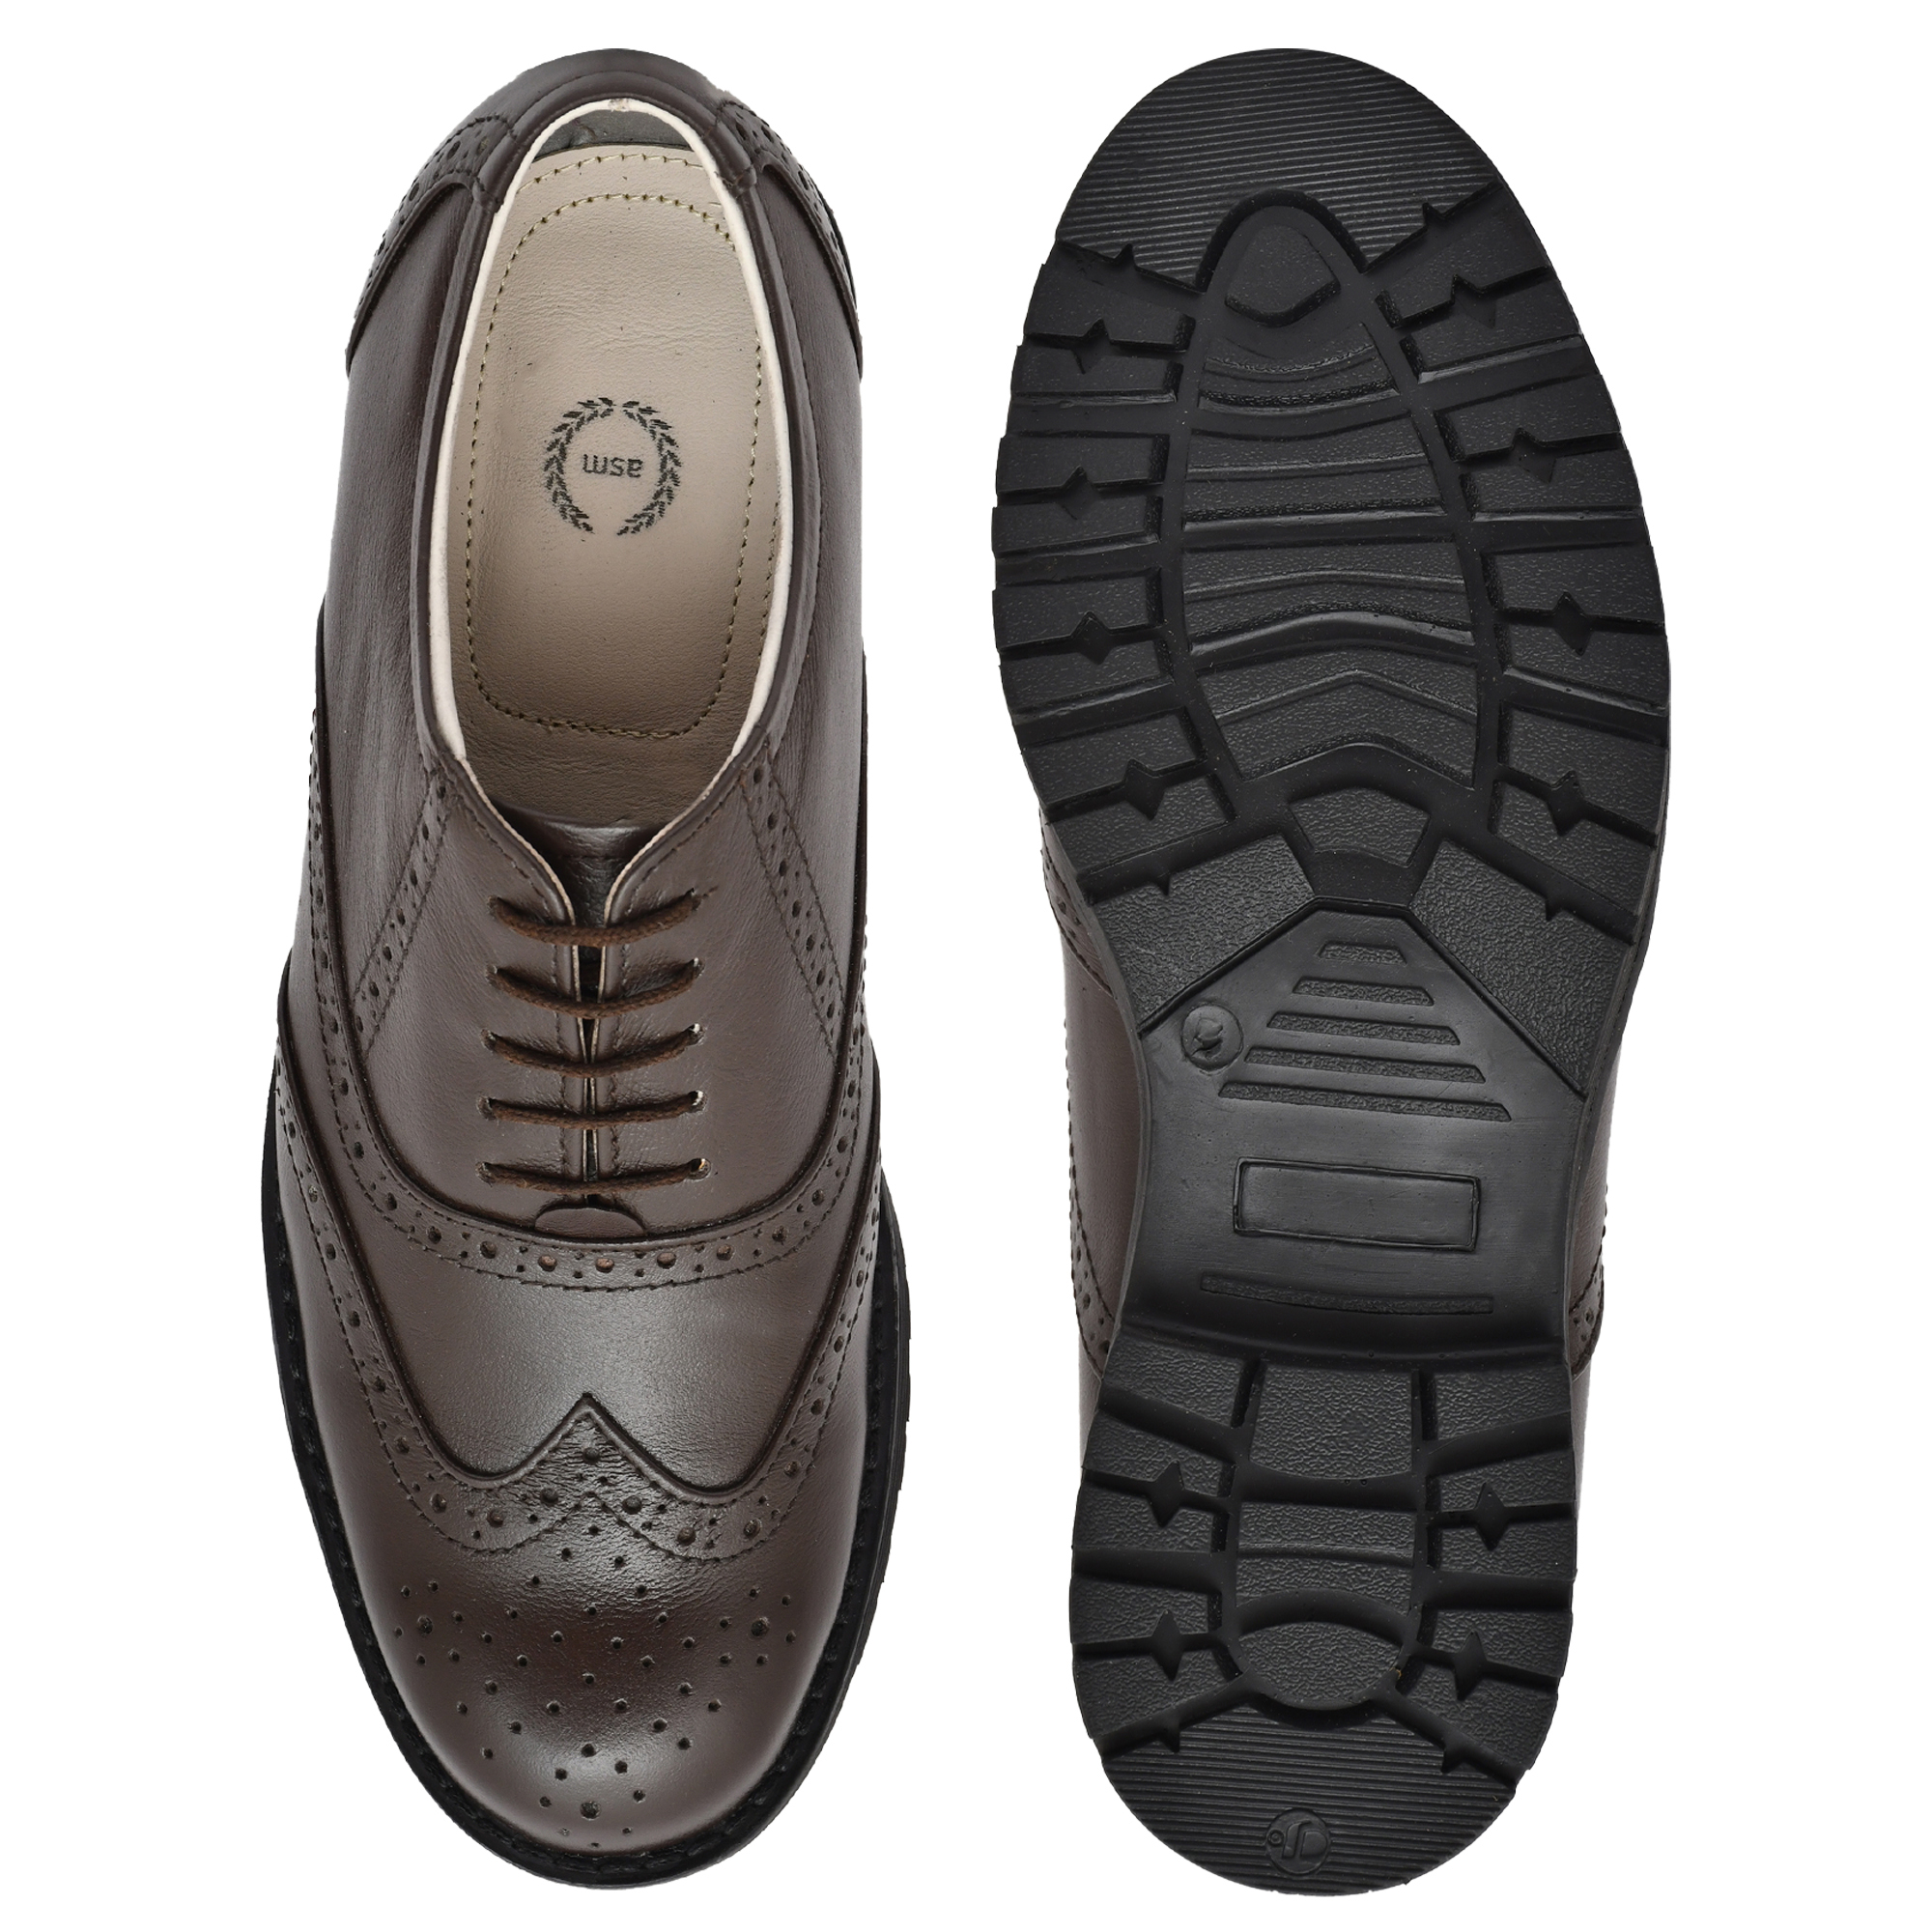 ASM Safety Formal Brown leather Brogue Shoes: